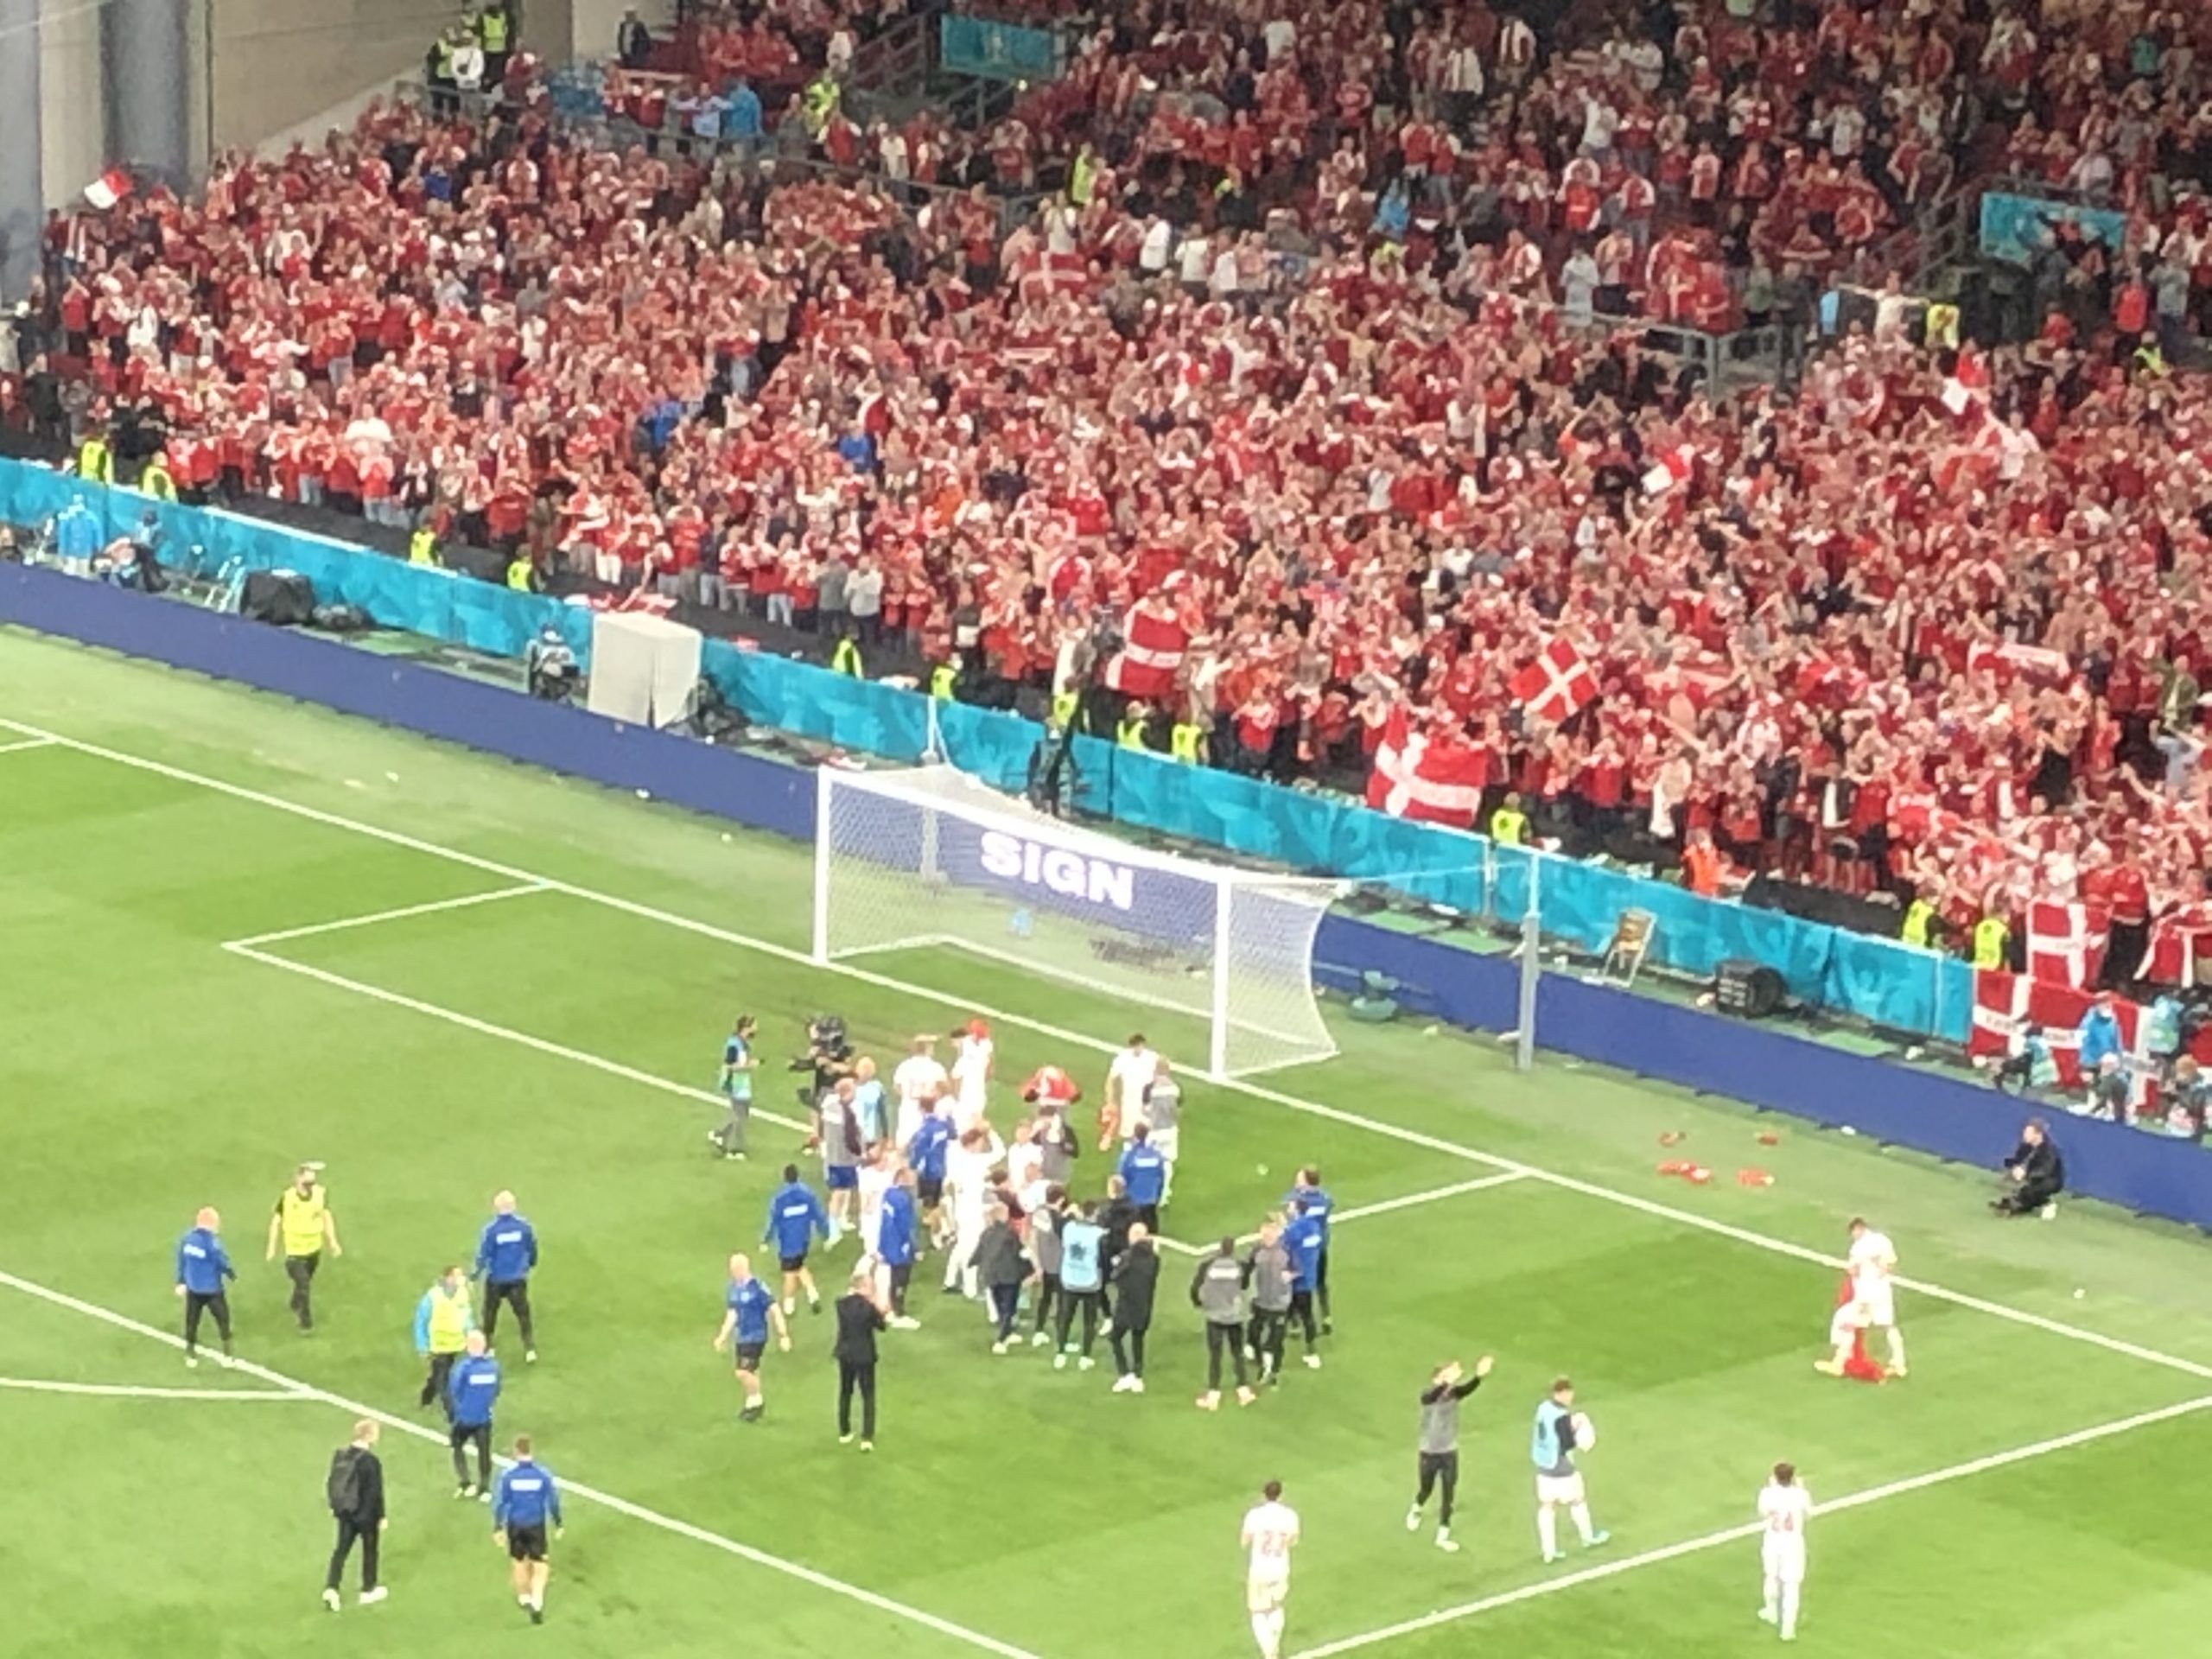 Fans urged to get COVID-19 test following Denmark’s game against Russia